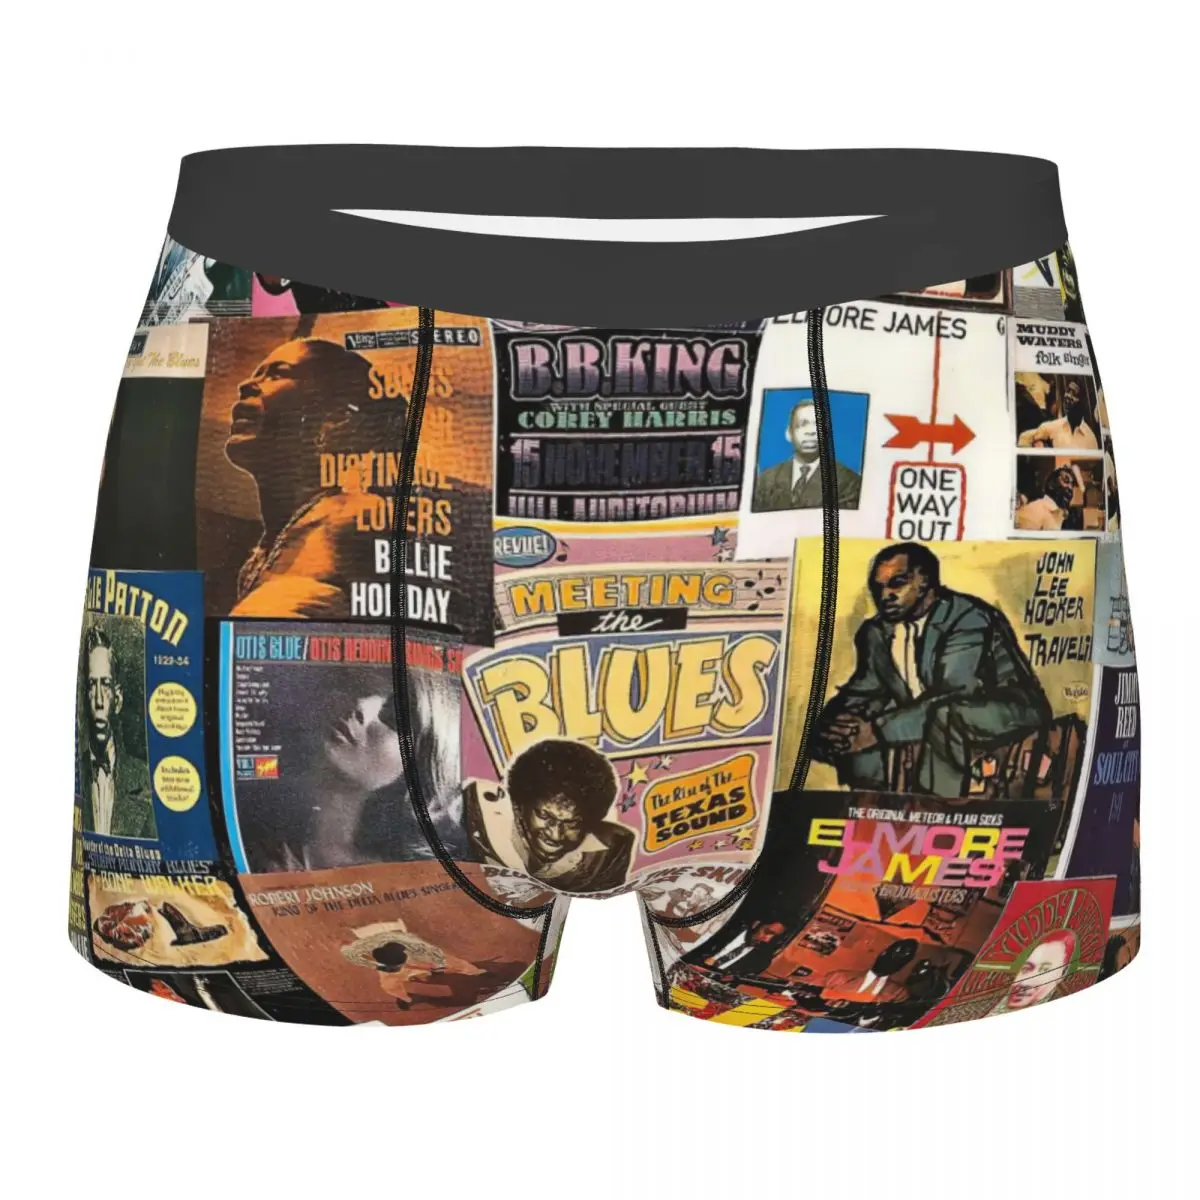 Blues Music Collage Underpants Breathbale Panties Male Underwear Print Shorts Boxer Briefs digizulu guitar cable 6 35mm 1 4 ts mono male to male for guitar bass mixer amplifier pro audio music instrument cord